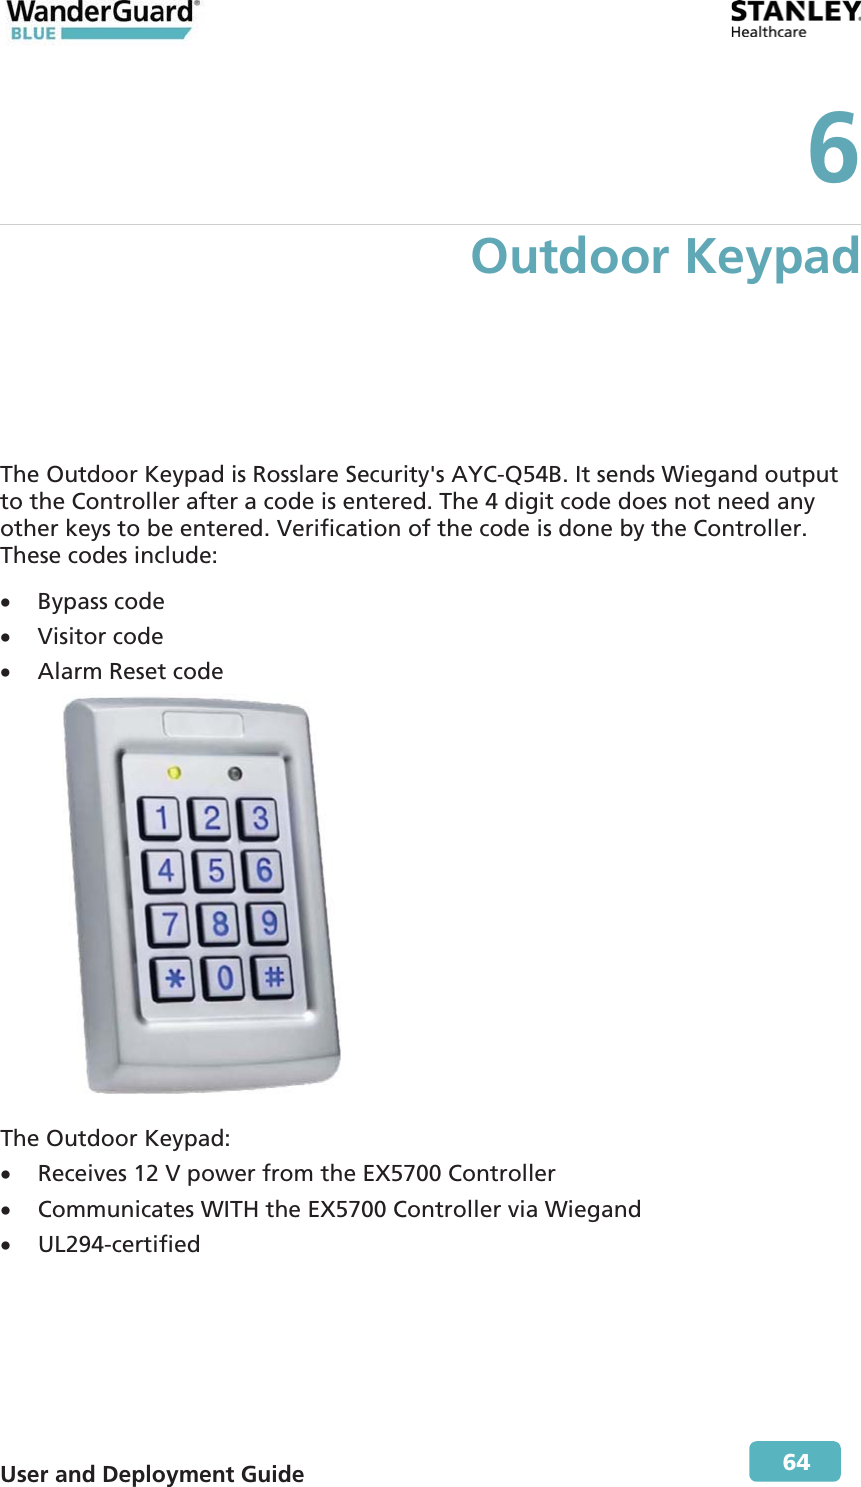  User and Deployment Guide        64 6 Outdoor Keypad The Outdoor Keypad is Rosslare Security&apos;s AYC-Q54B. It sends Wiegand output to the Controller after a code is entered. The 4 digit code does not need any other keys to be entered. Verification of the code is done by the Controller. These codes include: x Bypass code x Visitor code x Alarm Reset code              The Outdoor Keypad: x Receives 12 V power from the EX5700 Controller x Communicates WITH the EX5700 Controller via Wiegand x UL294-certified 